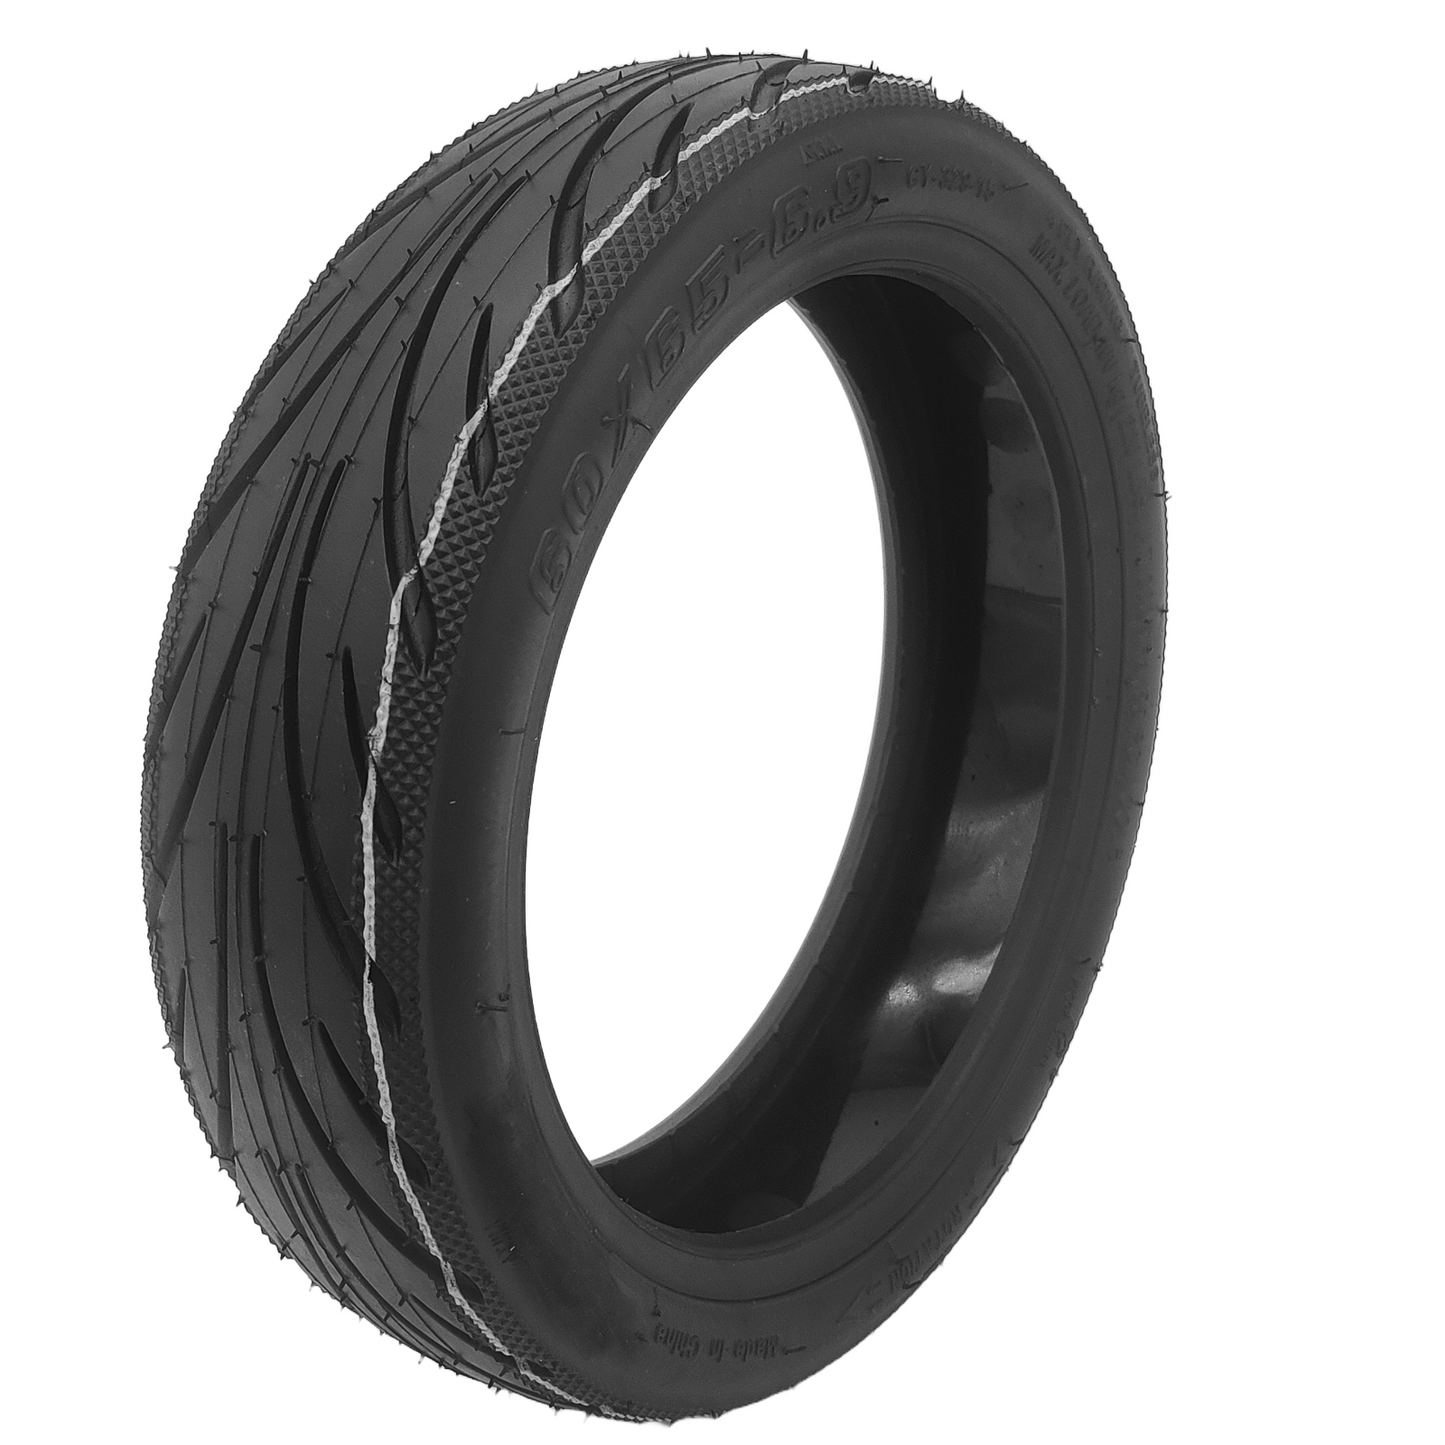 Ninebot Max G2 G2D tire rear wheel 60/65-6.9 tubeless with gel layer